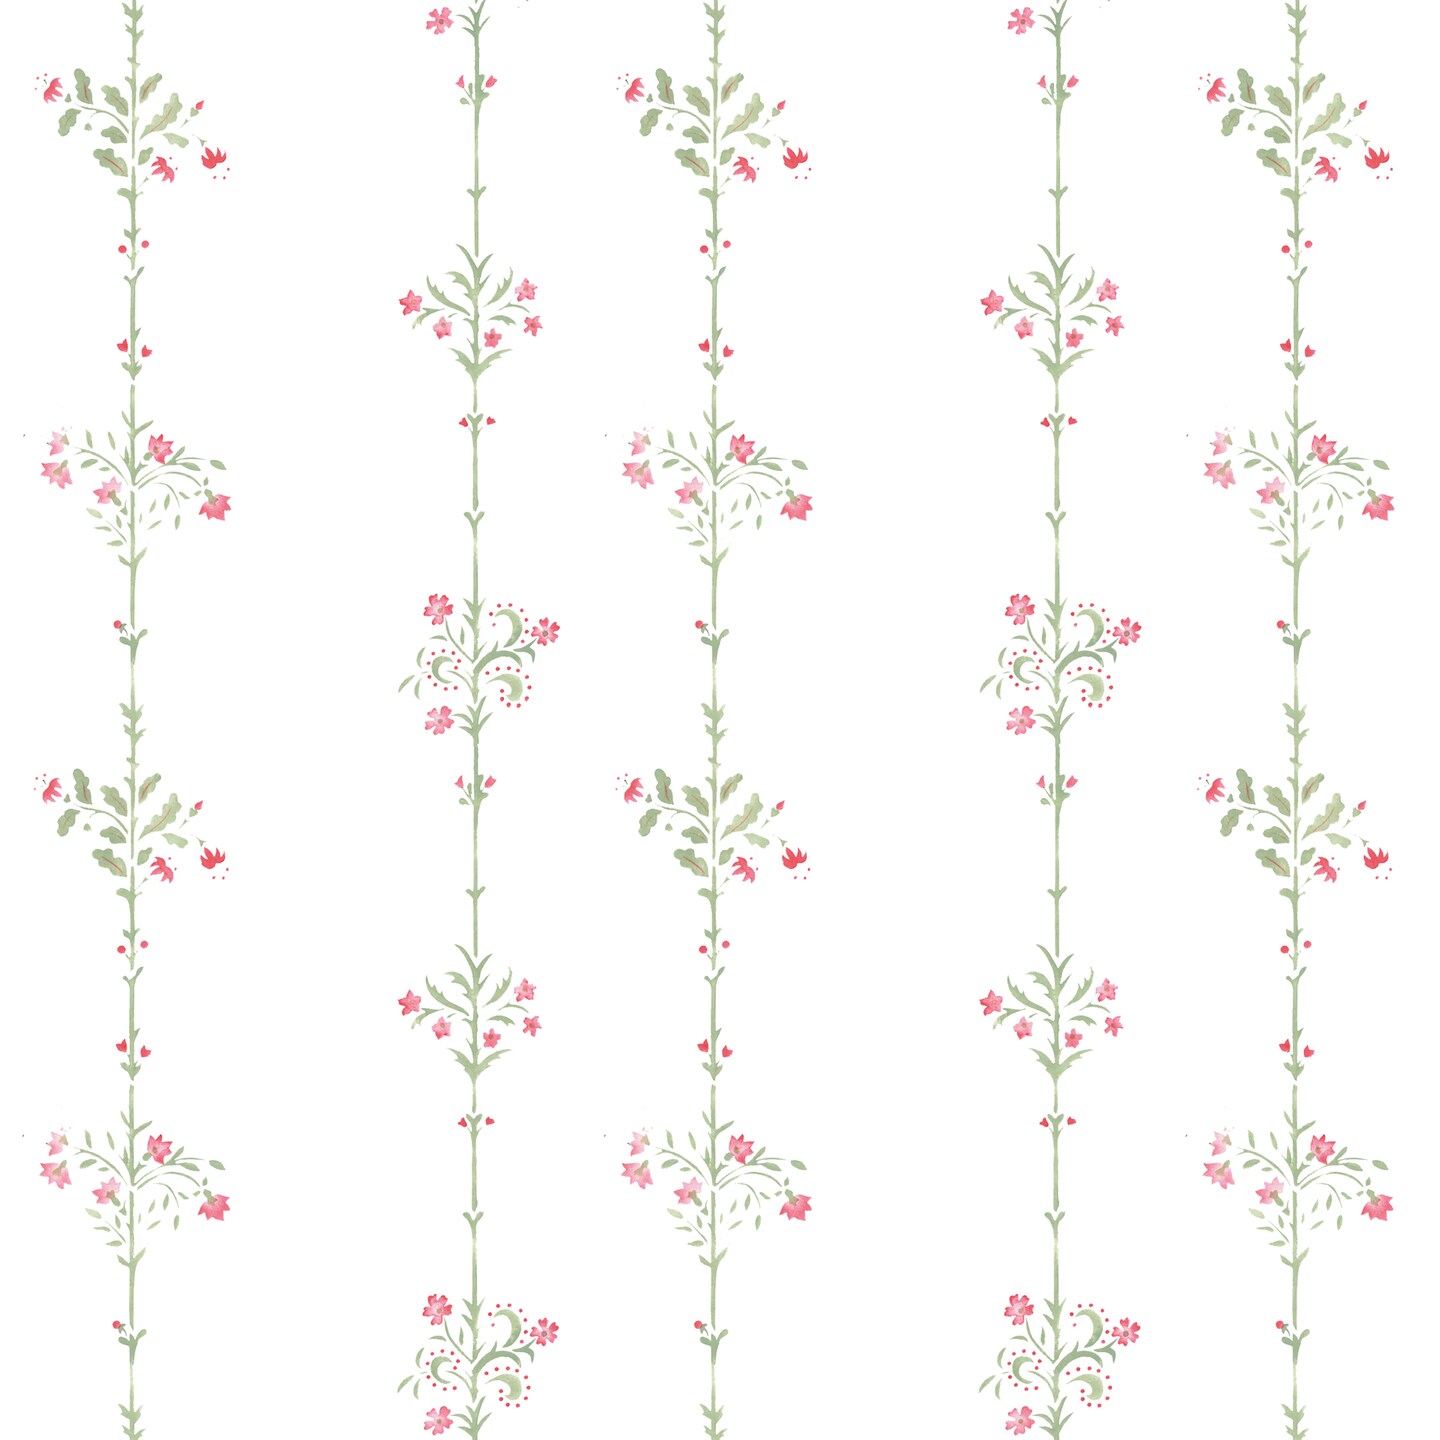 Floral Stripe Wallpaper Wall Stencil | 3231 by Designer Stencils | Floral Stencils | Reusable Art Craft Stencils for Painting on Walls, Canvas, Wood | Reusable Plastic Paint Stencil for Home Makeover | Easy to Use &#x26; Clean Art Stencil